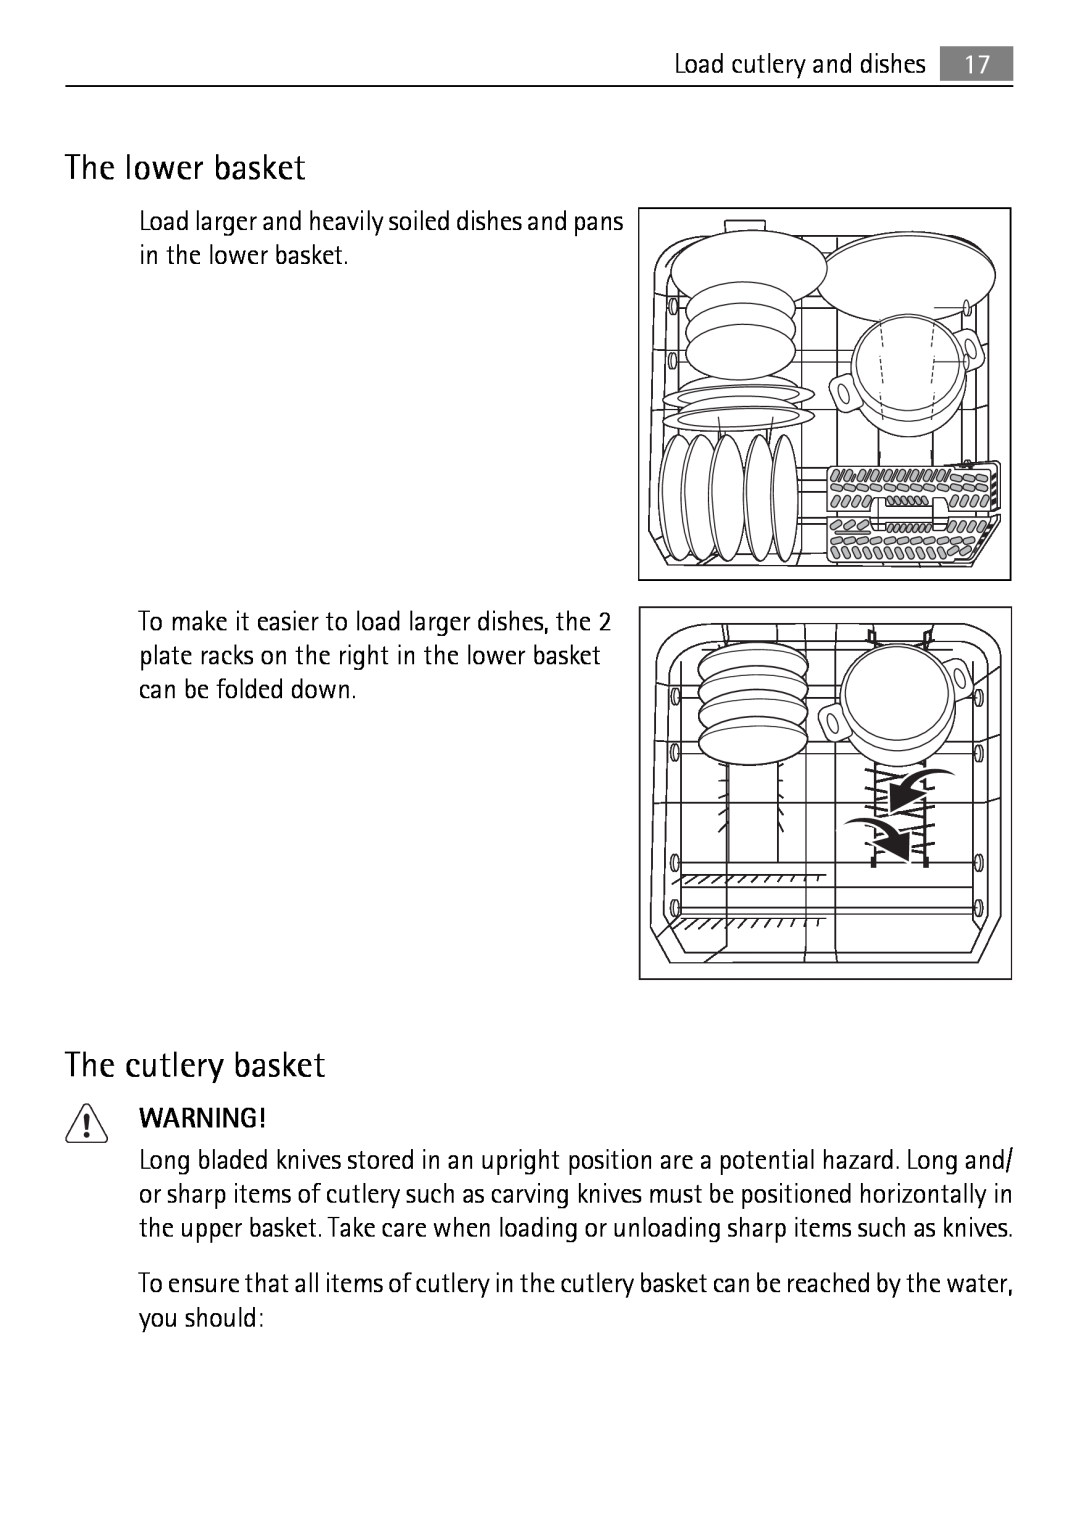 Electrolux 65011 VI user manual The lower basket, The cutlery basket 